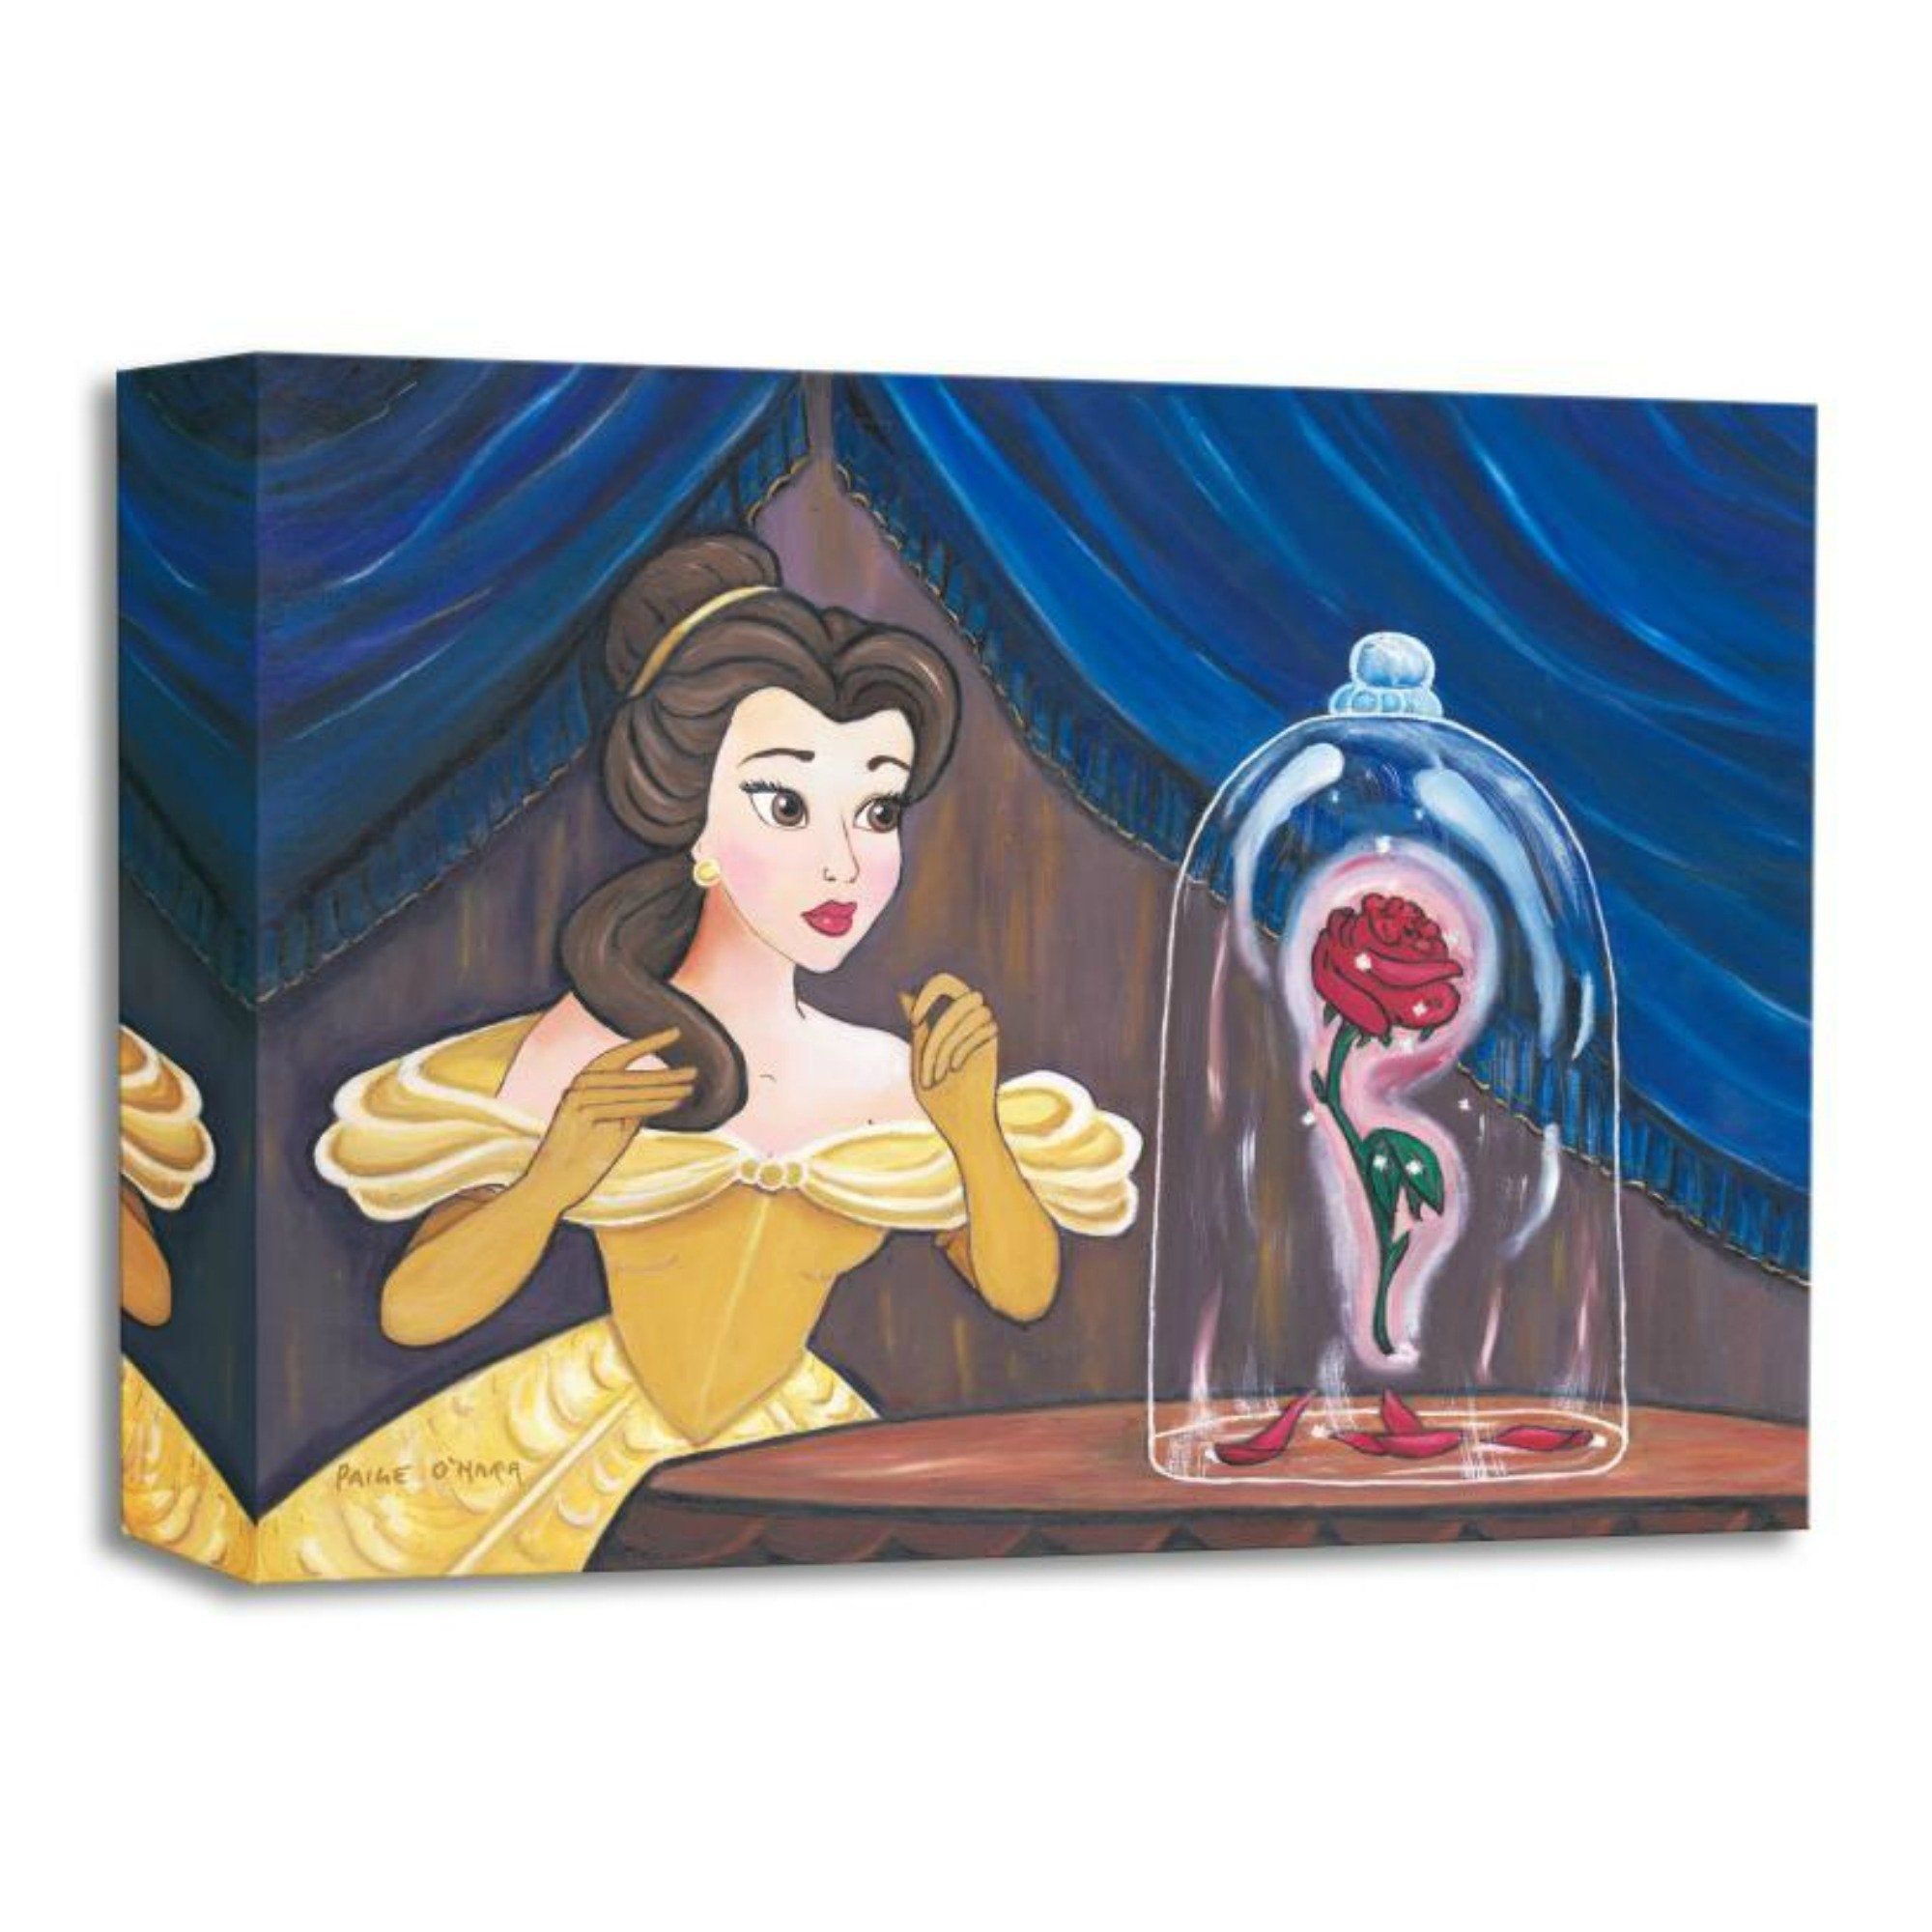 Enchanted Rose by Paige O'Hara.  Belle finds the enchanted red rose, inside a the glass dome. Inspired by Walt Disney's  Beauty and the Beast, fairy-tale story.